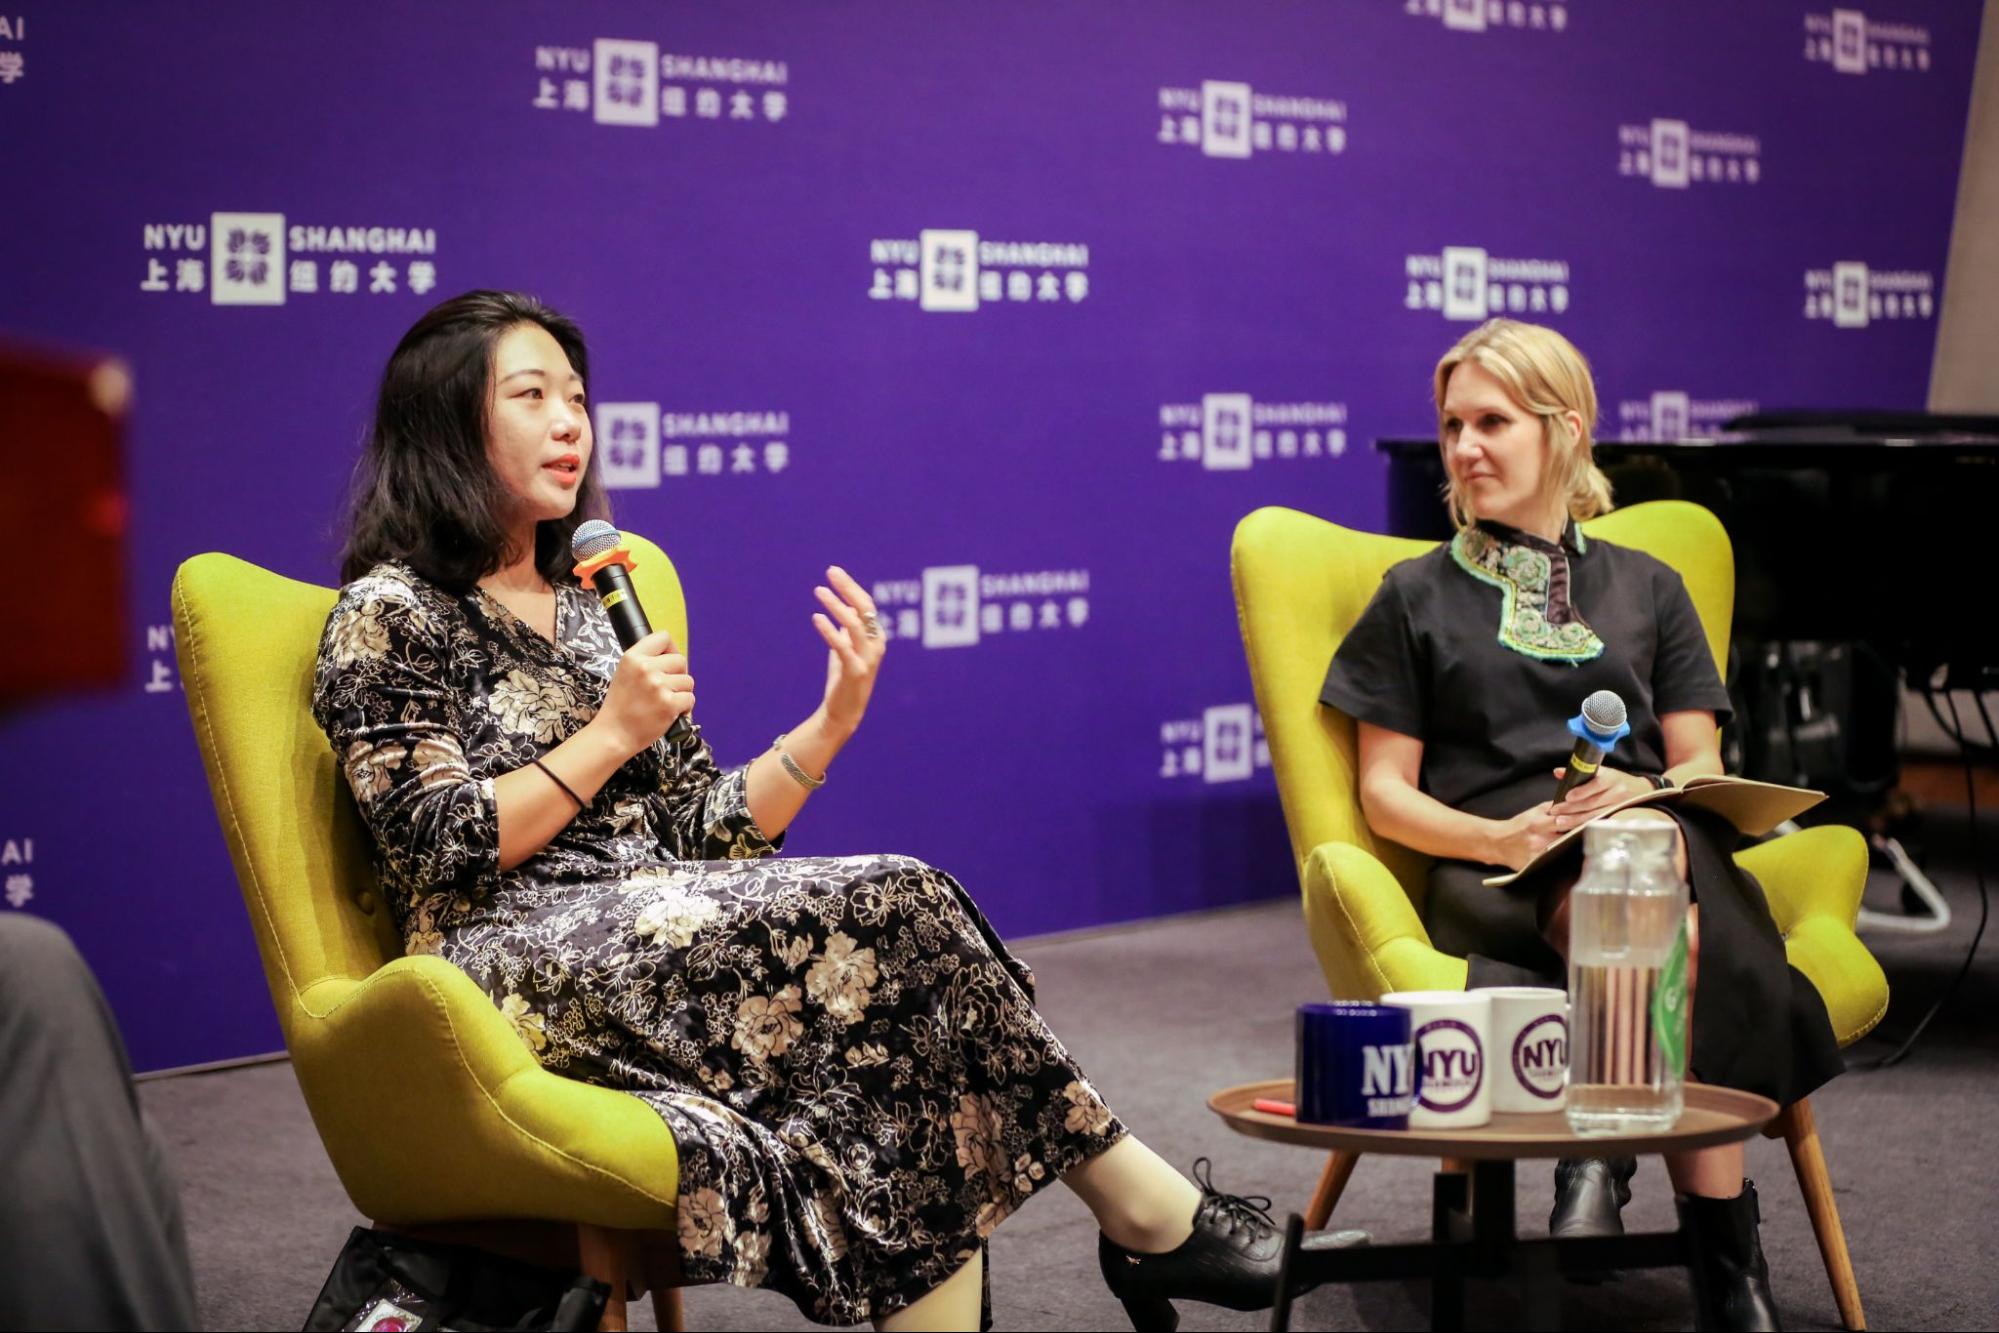 Li (left) and Lindtner (right) discuss the film after its screening